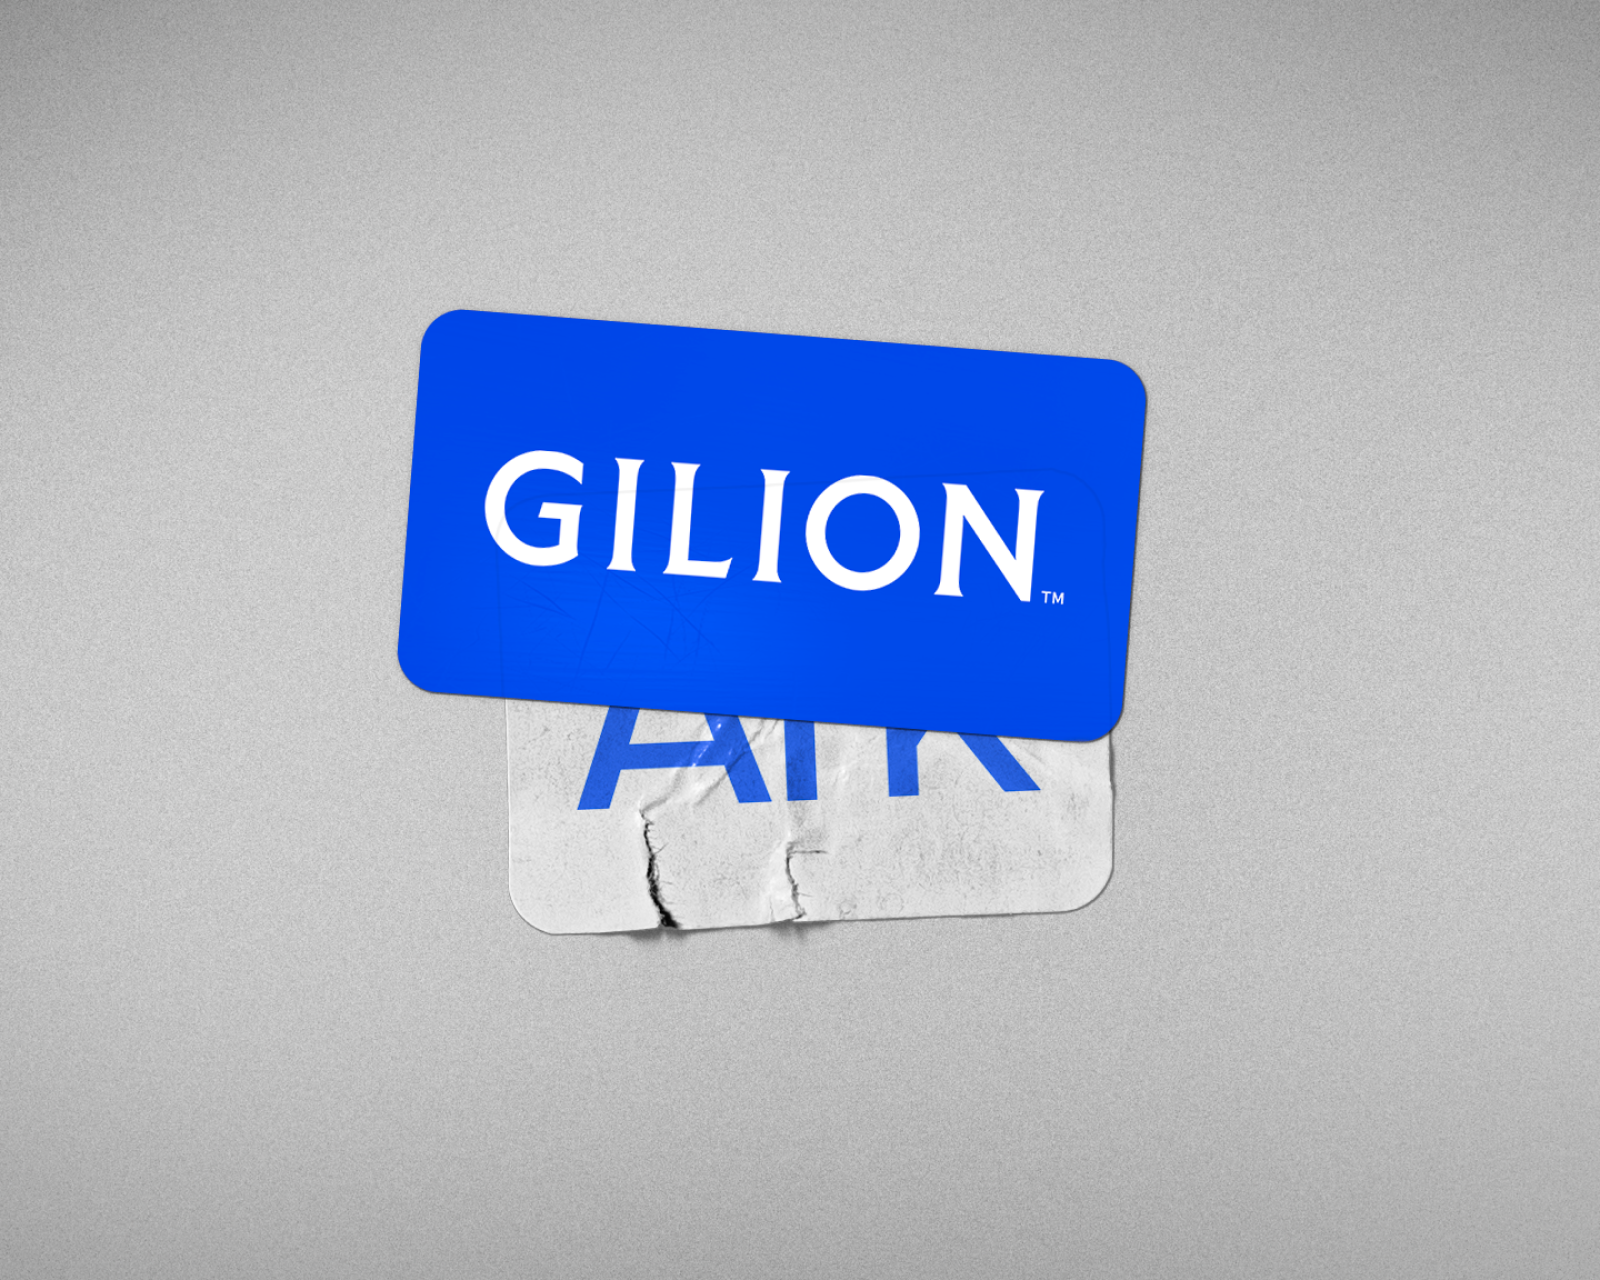 Gilion announced it secured €10 million in equity funds